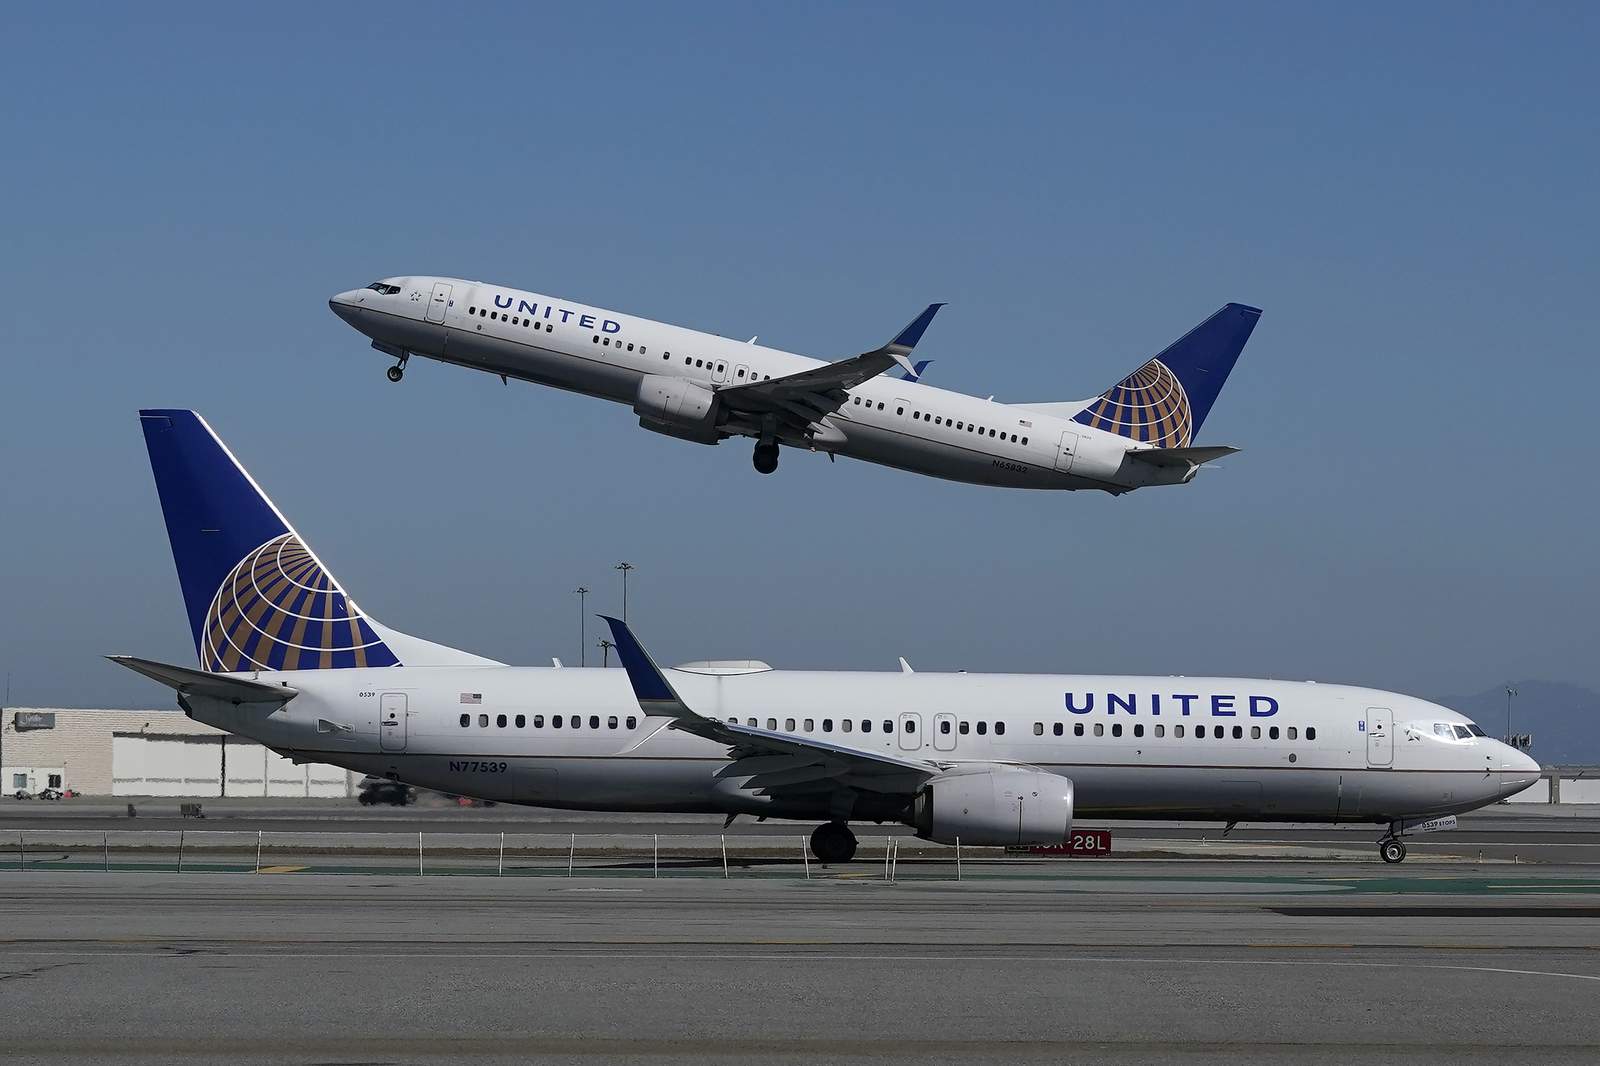 United seeks to build its own diverse pipeline of pilots